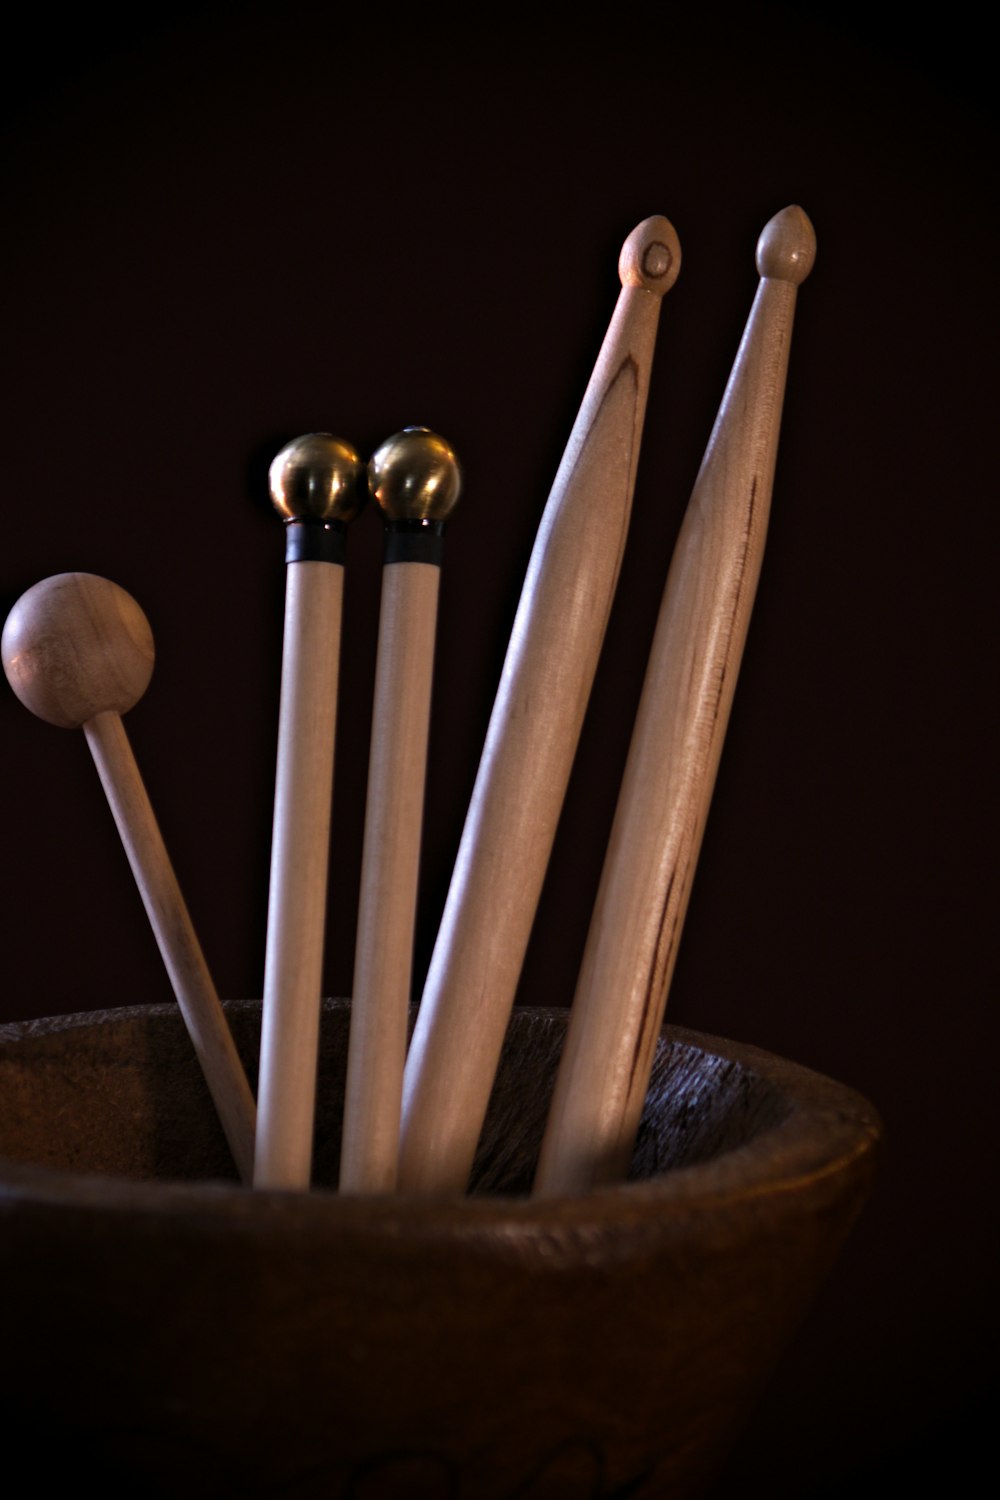 a wooden bowl filled with wooden spoons and wooden mallets